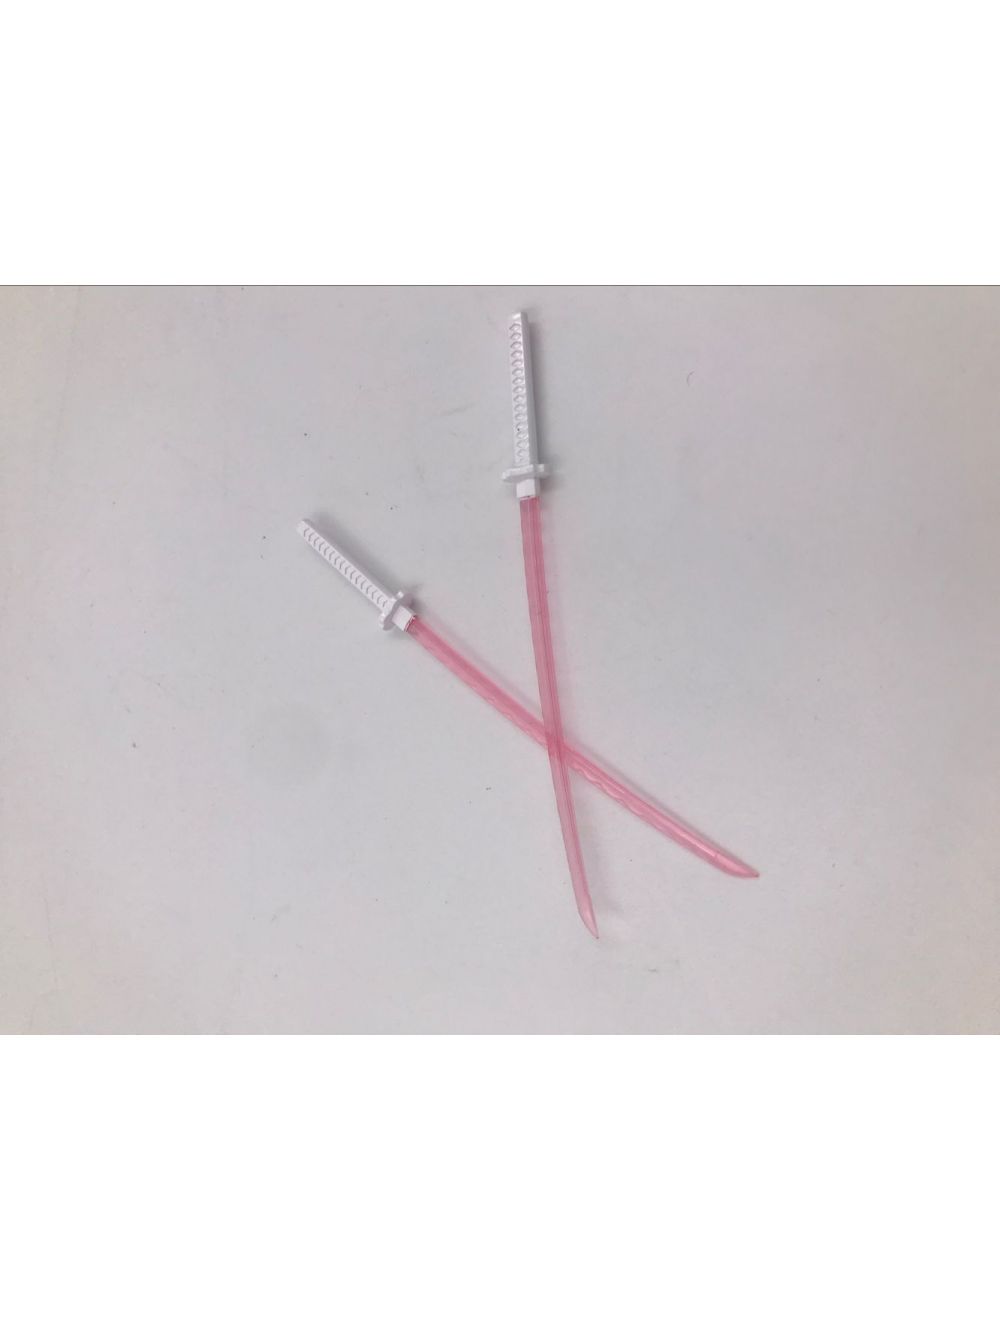 Dr.Wu DW-P34 Double-Pole kit Pink version,In stock!